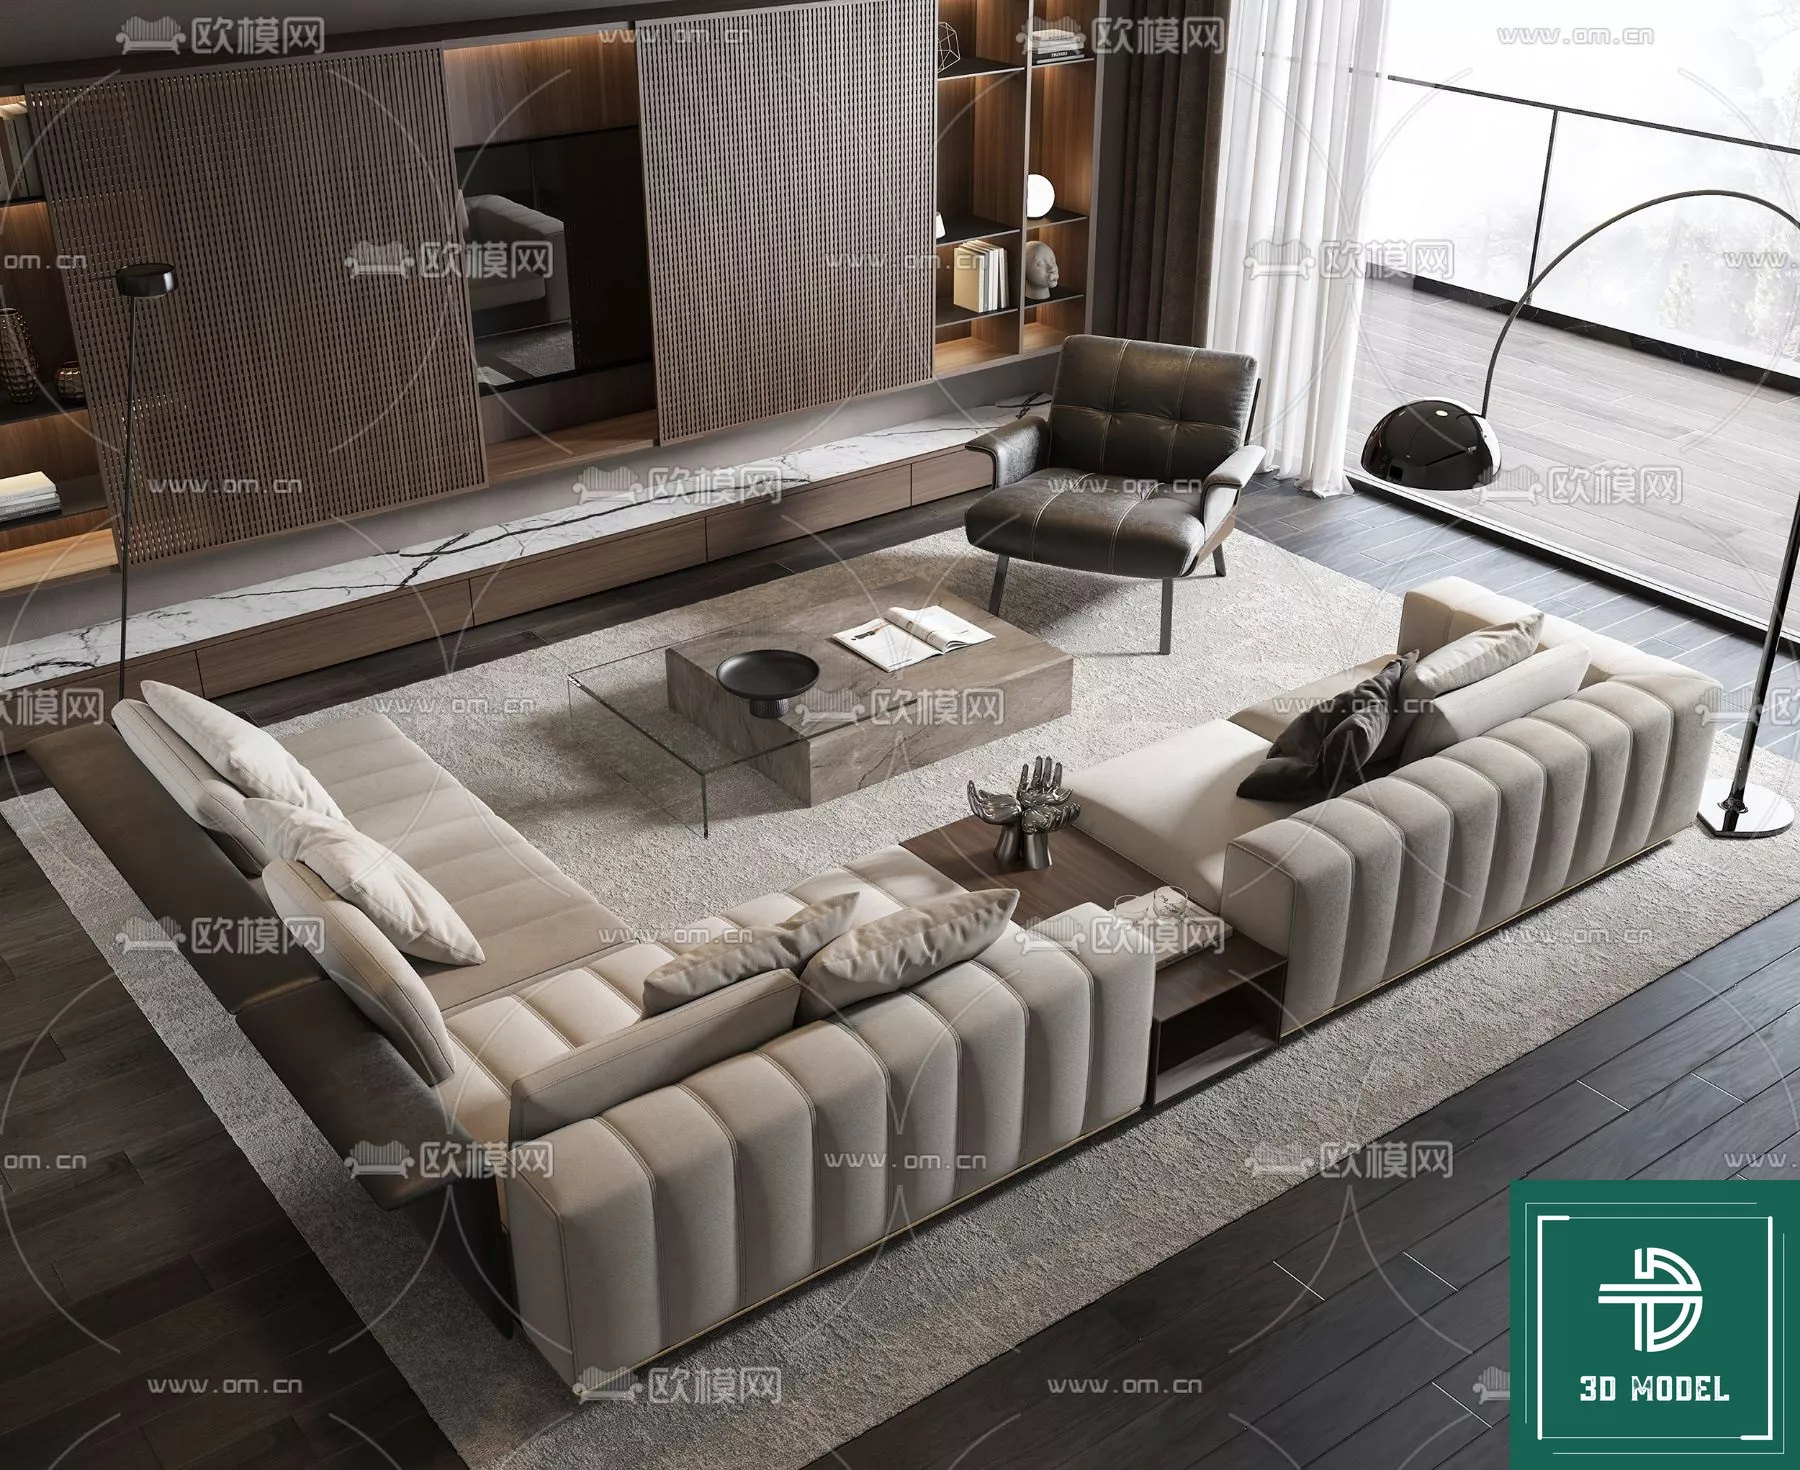 MODERN SOFA - SKETCHUP 3D MODEL - VRAY OR ENSCAPE - ID13337